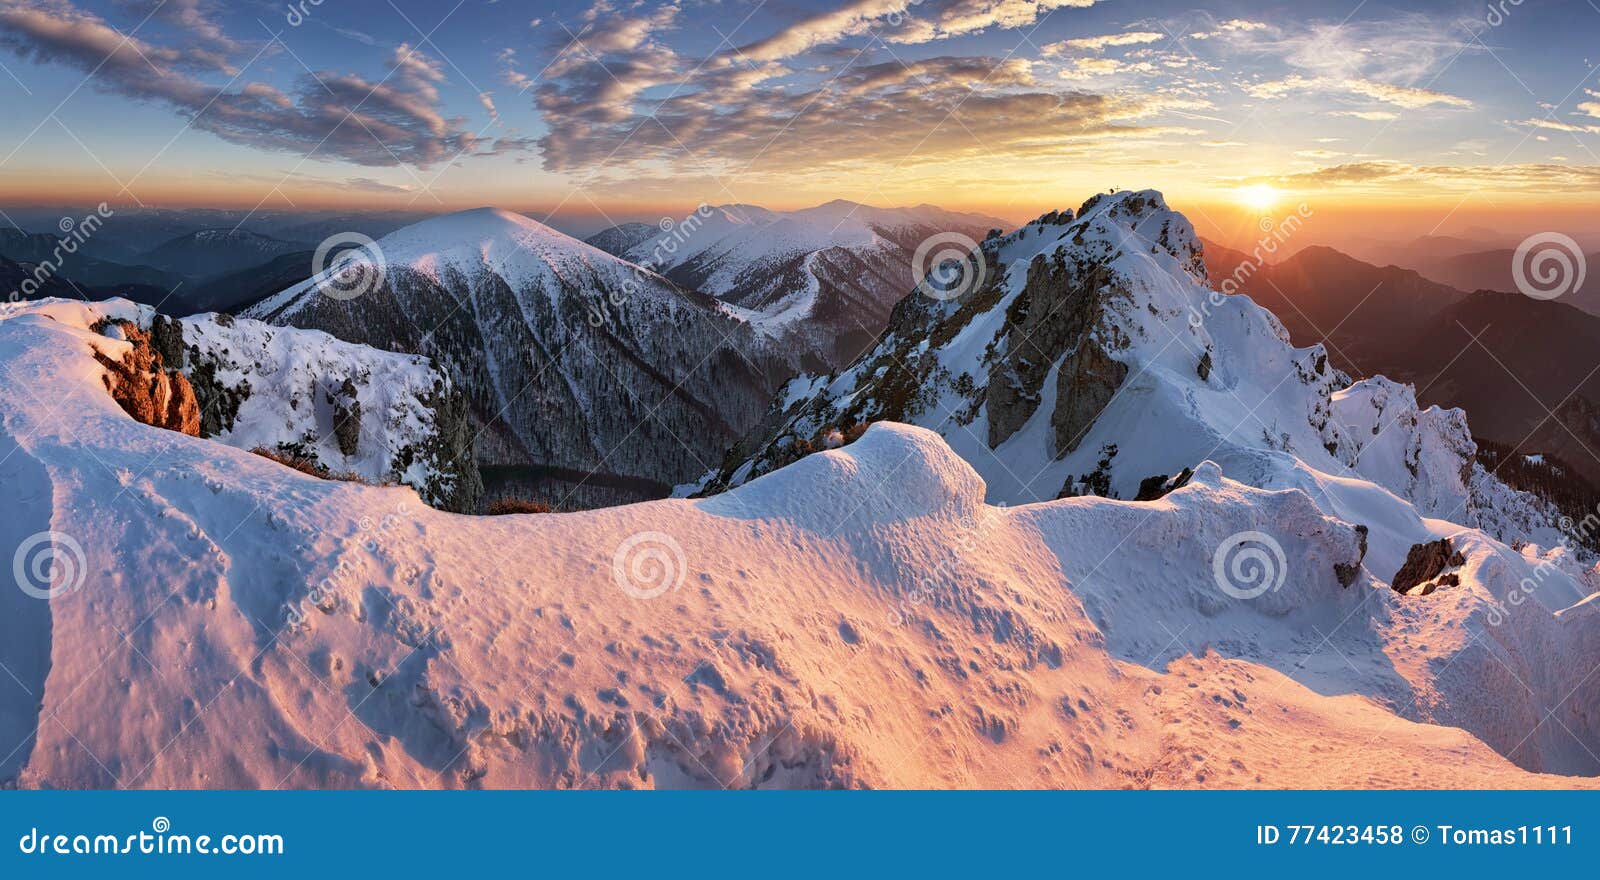 landscape at winter in sunset moutain, slovakia